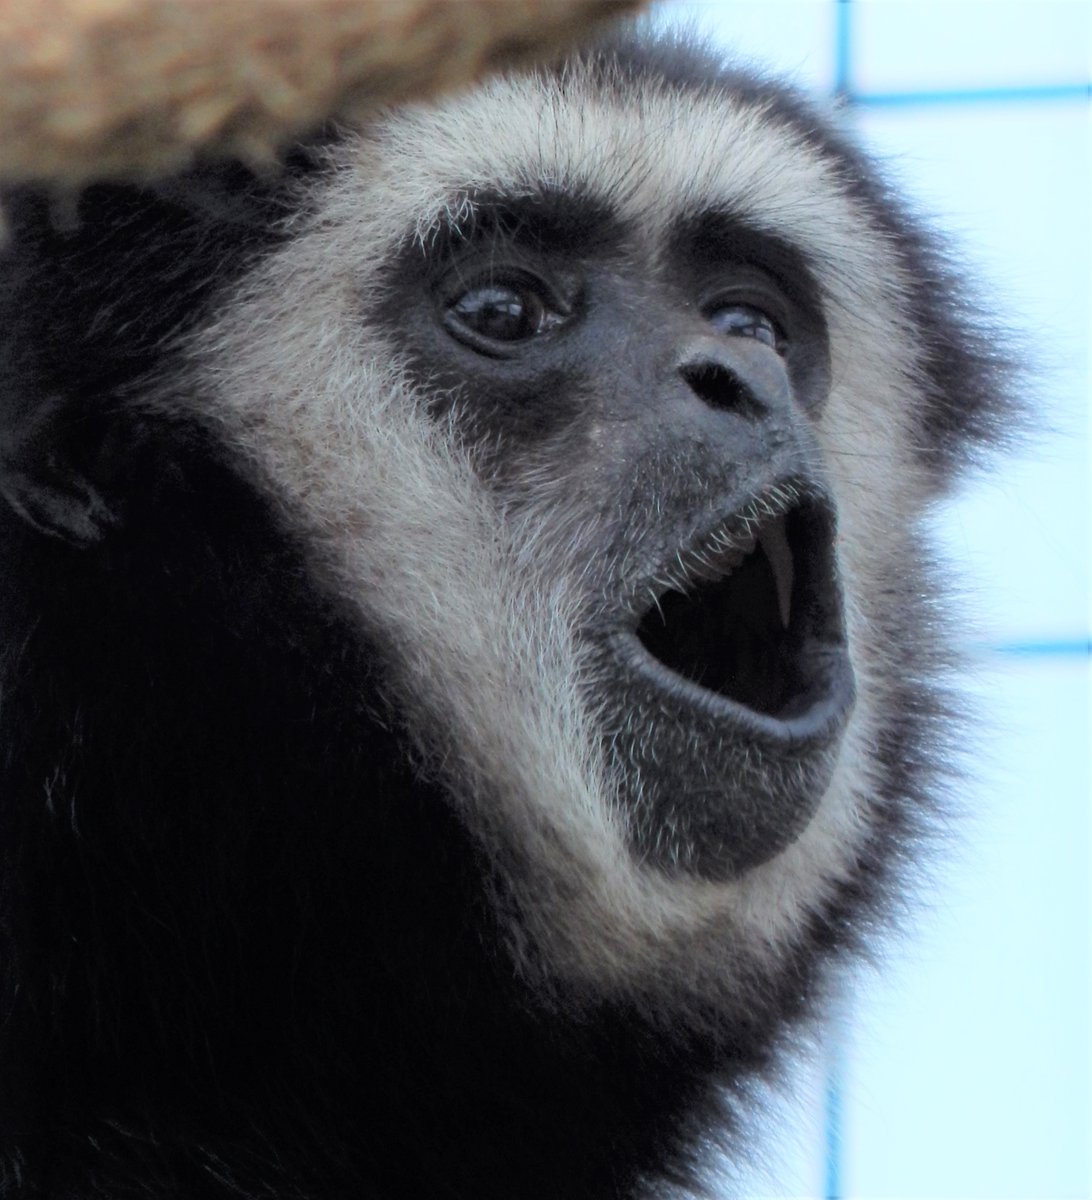 Have you heard Buddy WHOOT this season? We really believe his singing voice has improved. Listen to the gibbon during your next visit to Timbavati Wildlife Park. Open daily rain or shine. 9am-5pm. Unleash the adventure! #UnleashTheAdventureAtTimbavati #primates #tuesday #zoo